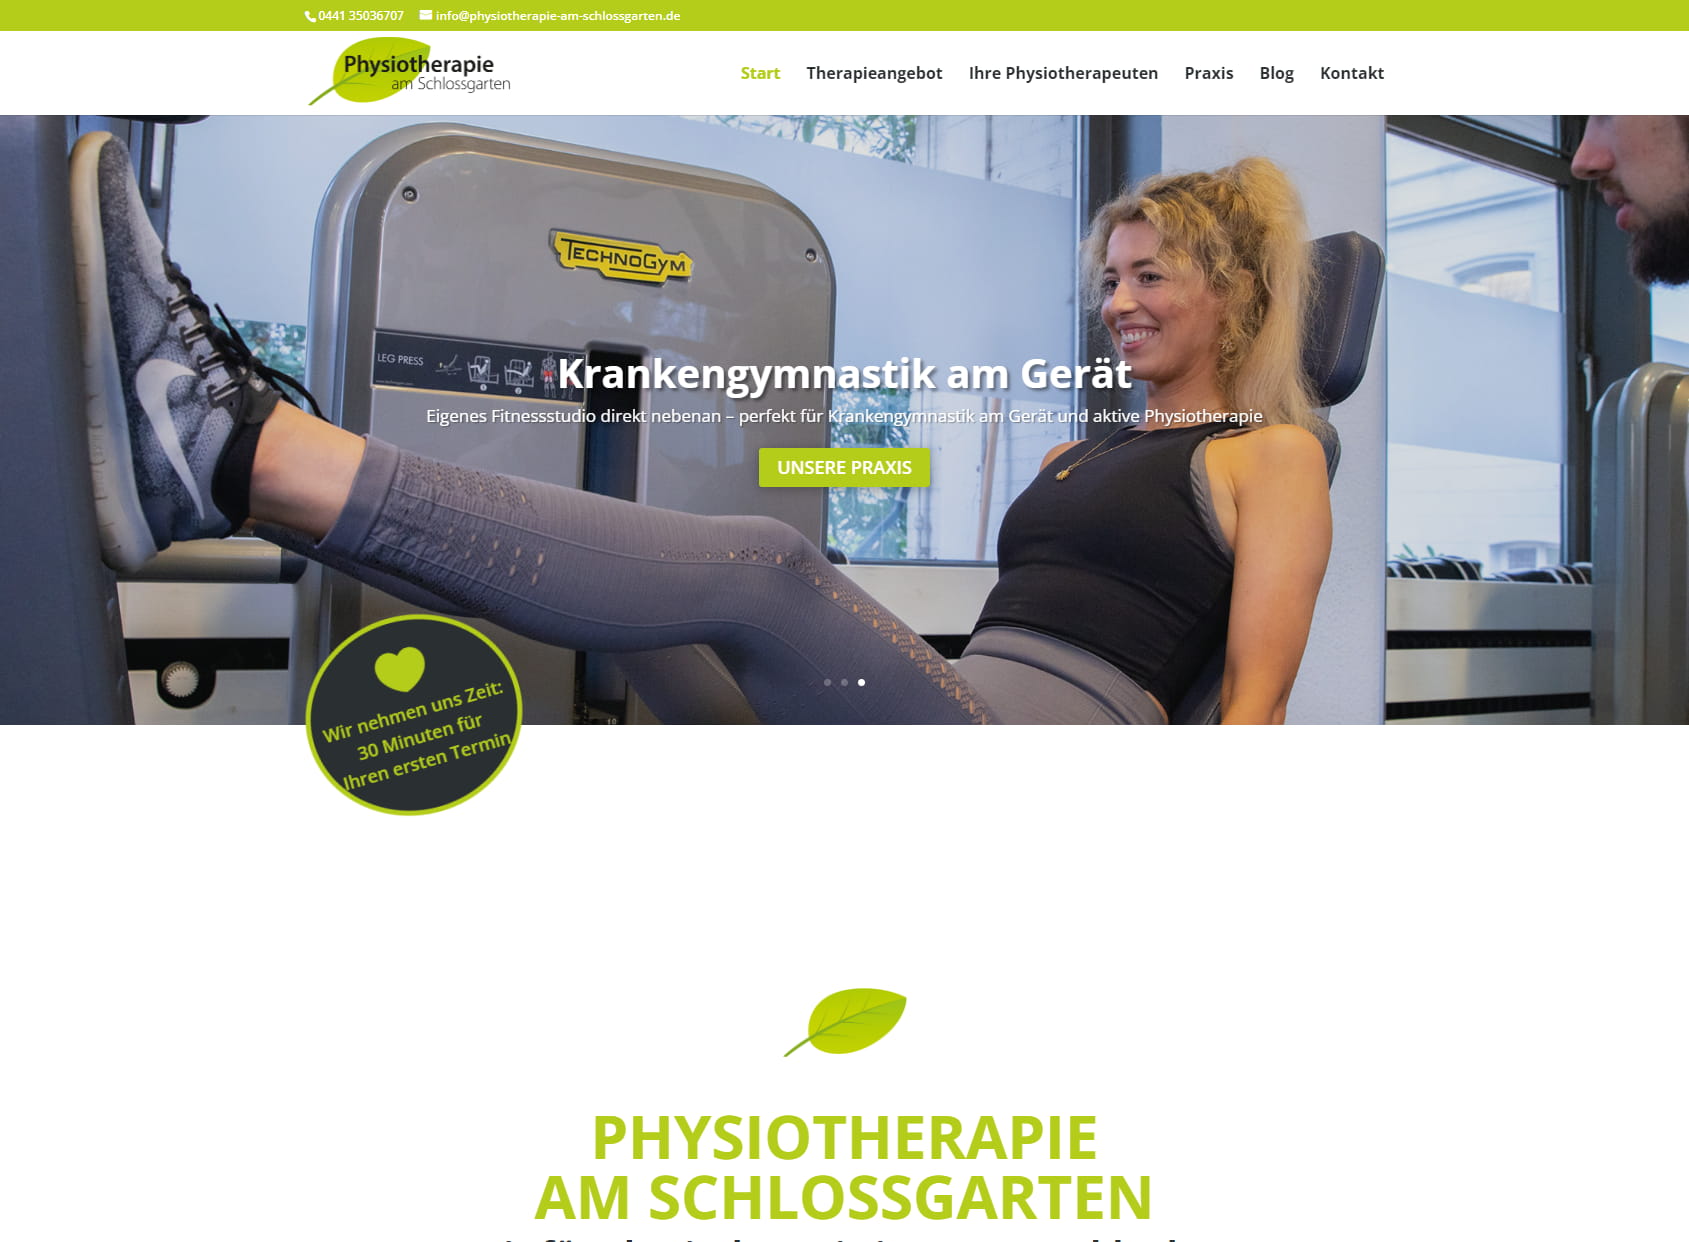 Physiotherapy at Castle Garden